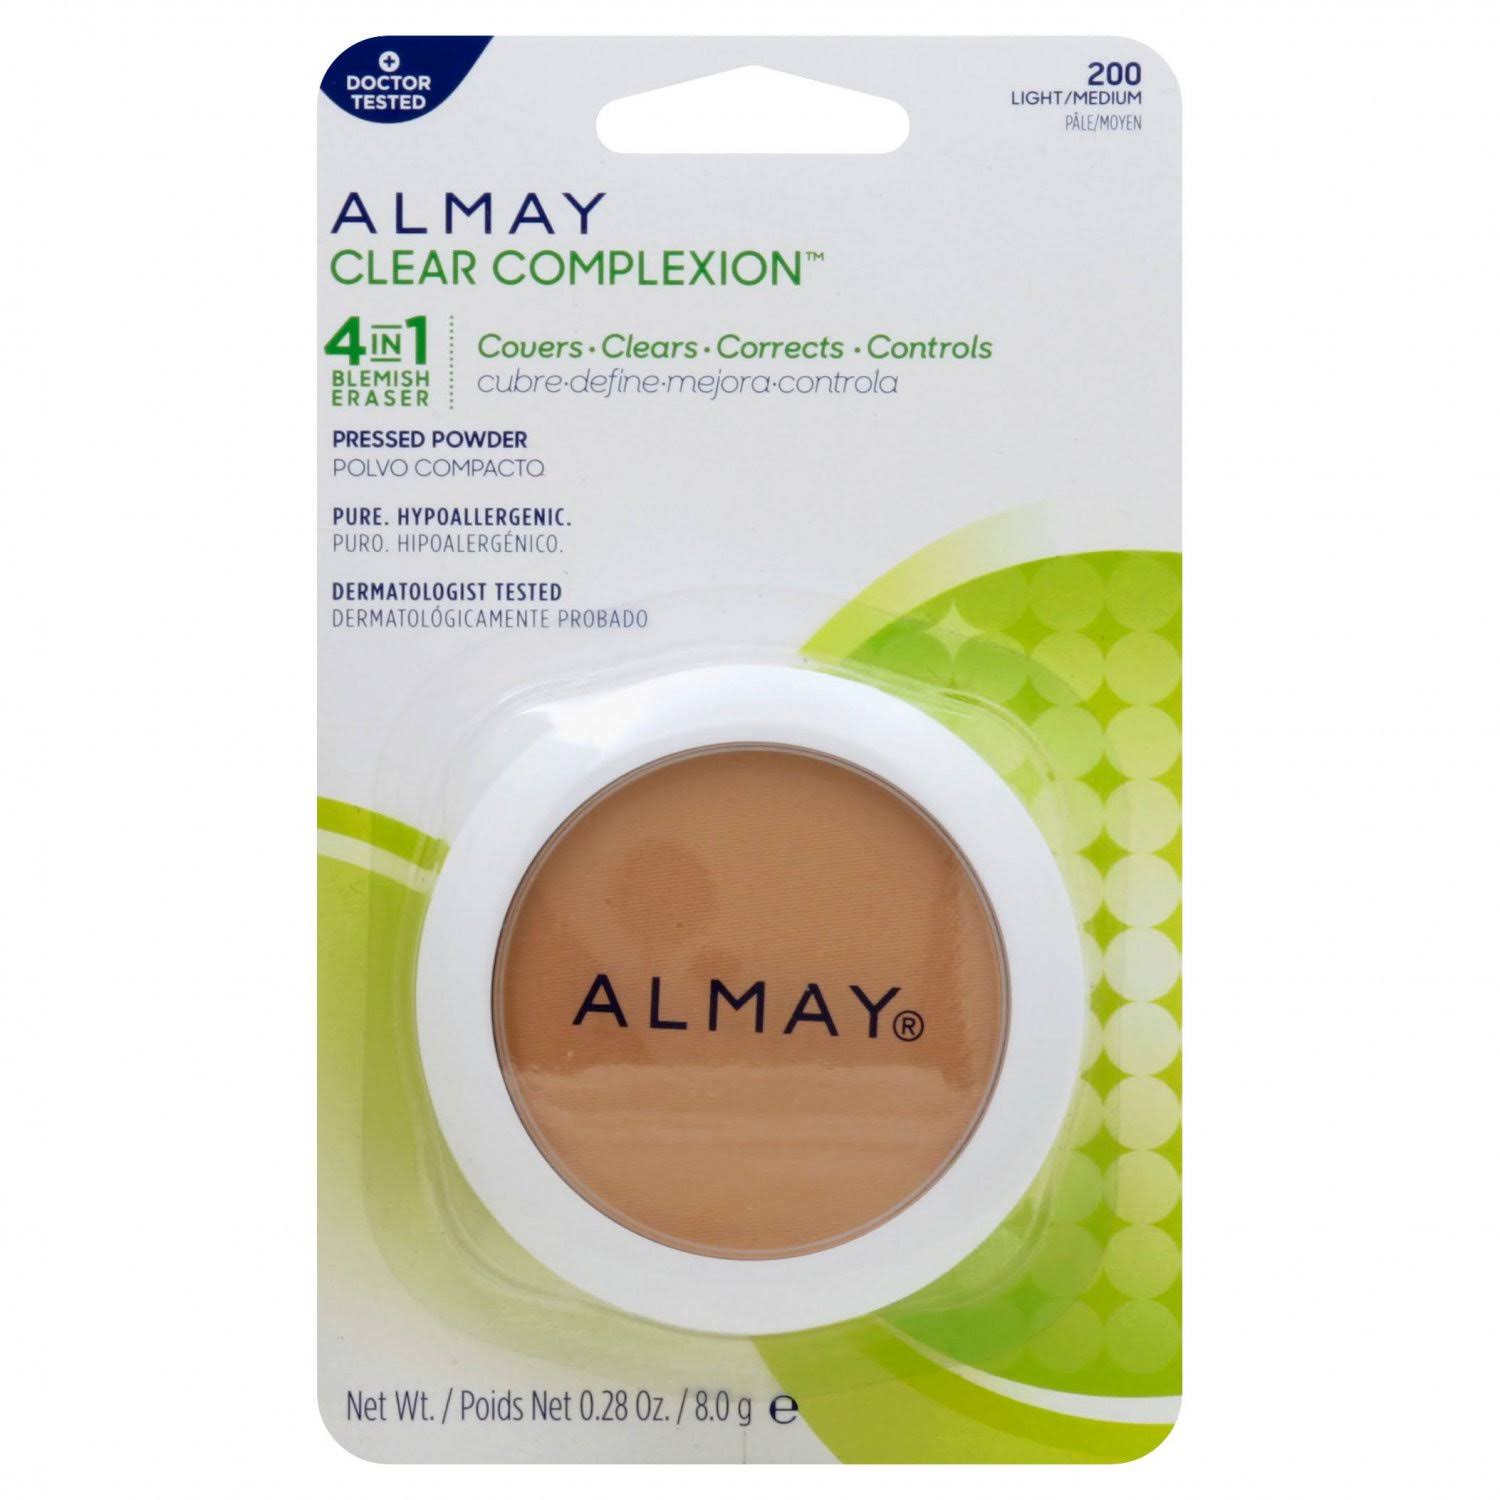 Almay Clear Complexion Pressed Powder - Light and Medium